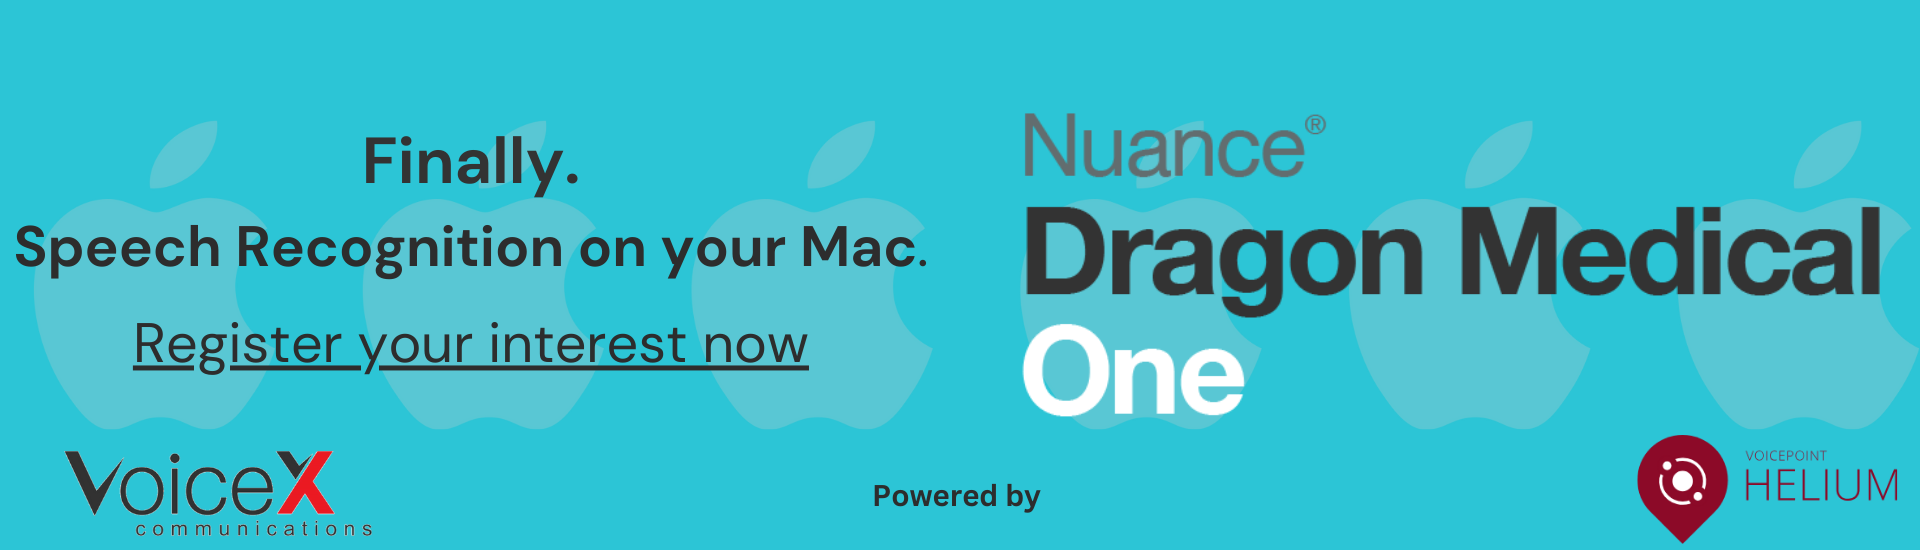 Dragon Medical One for Mac - Powered by VoicePoint Helium from VoiceX